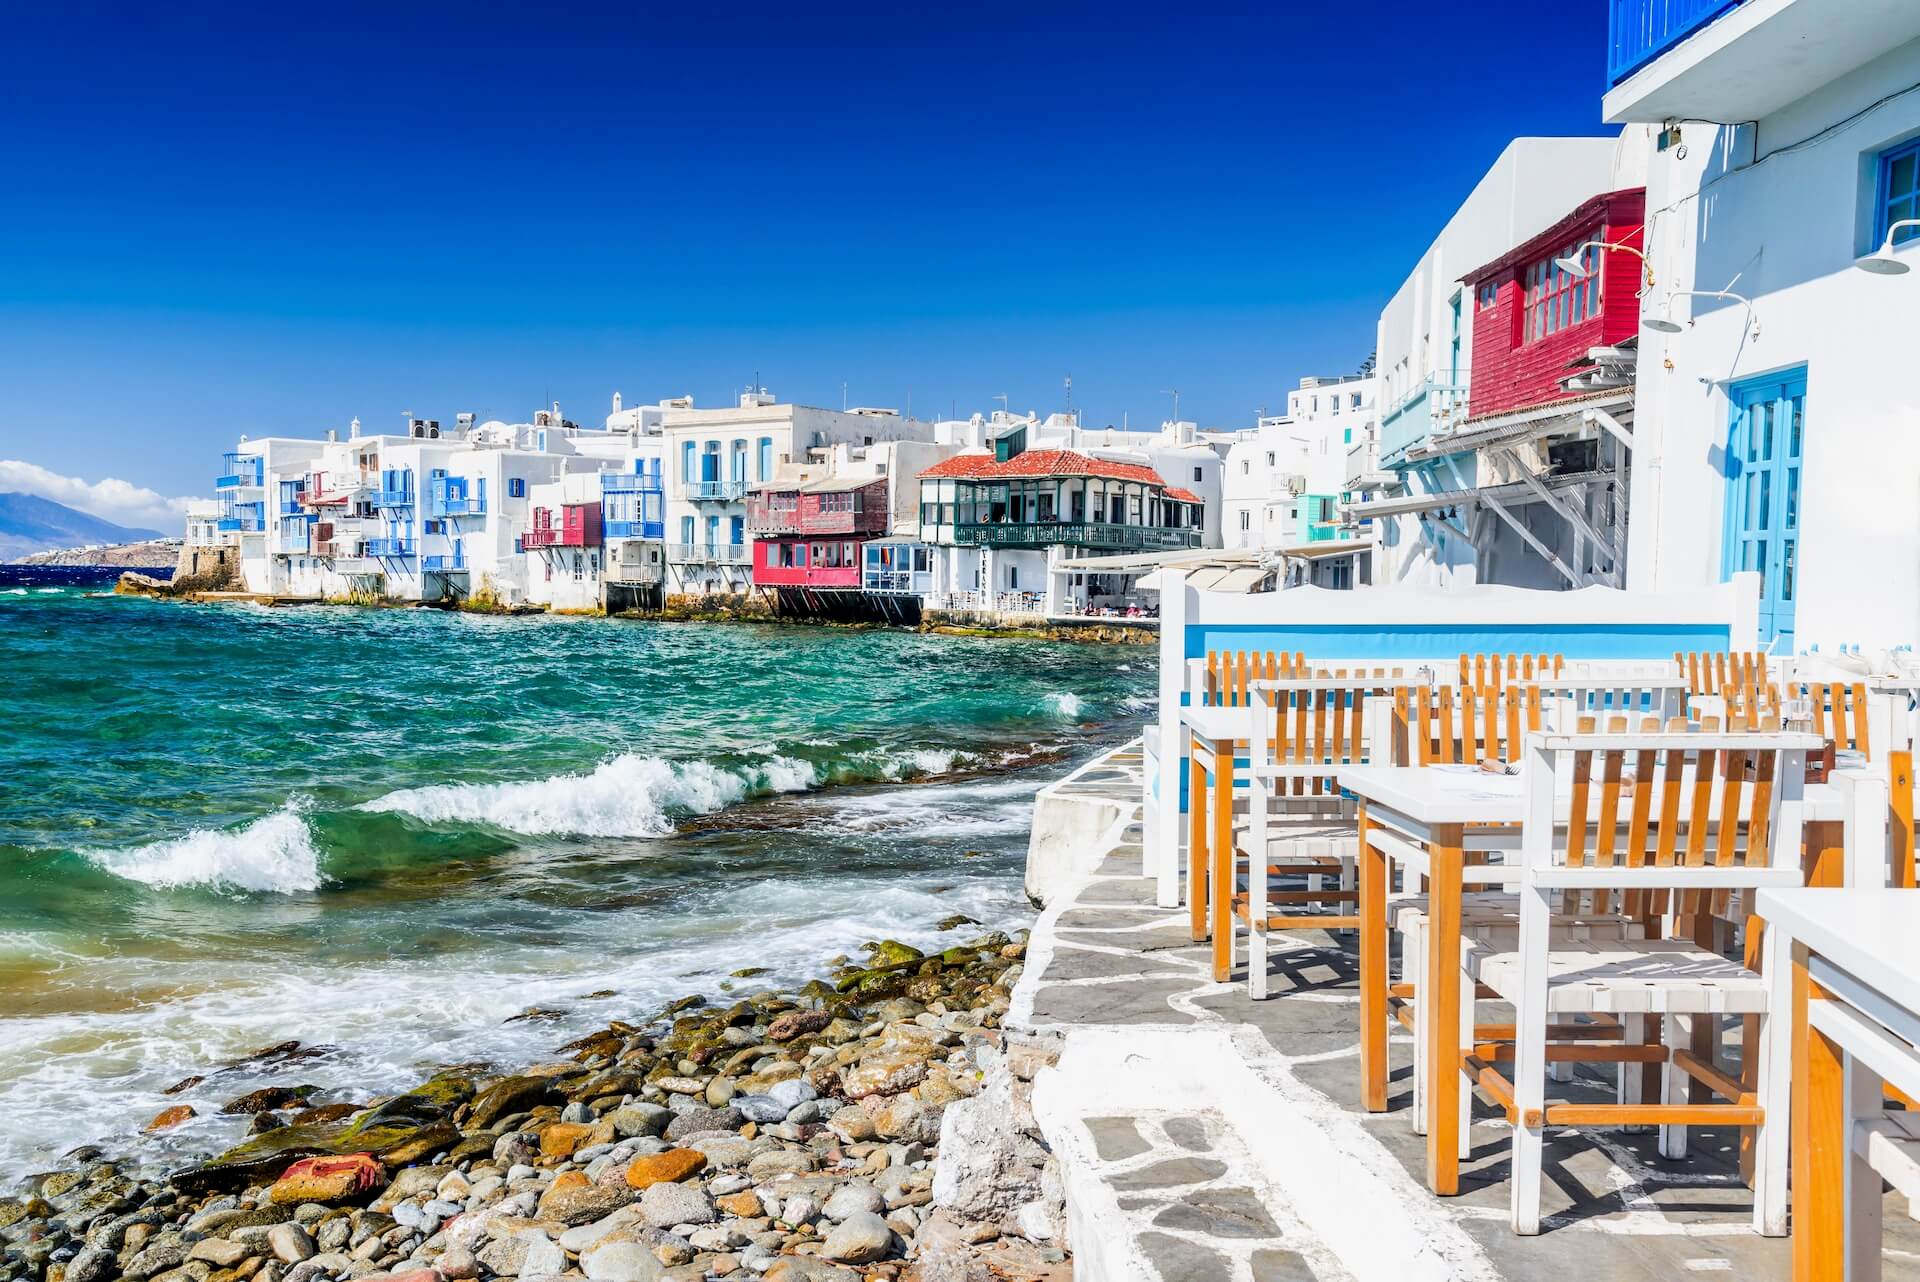 The houses on the coast of Mykonos 